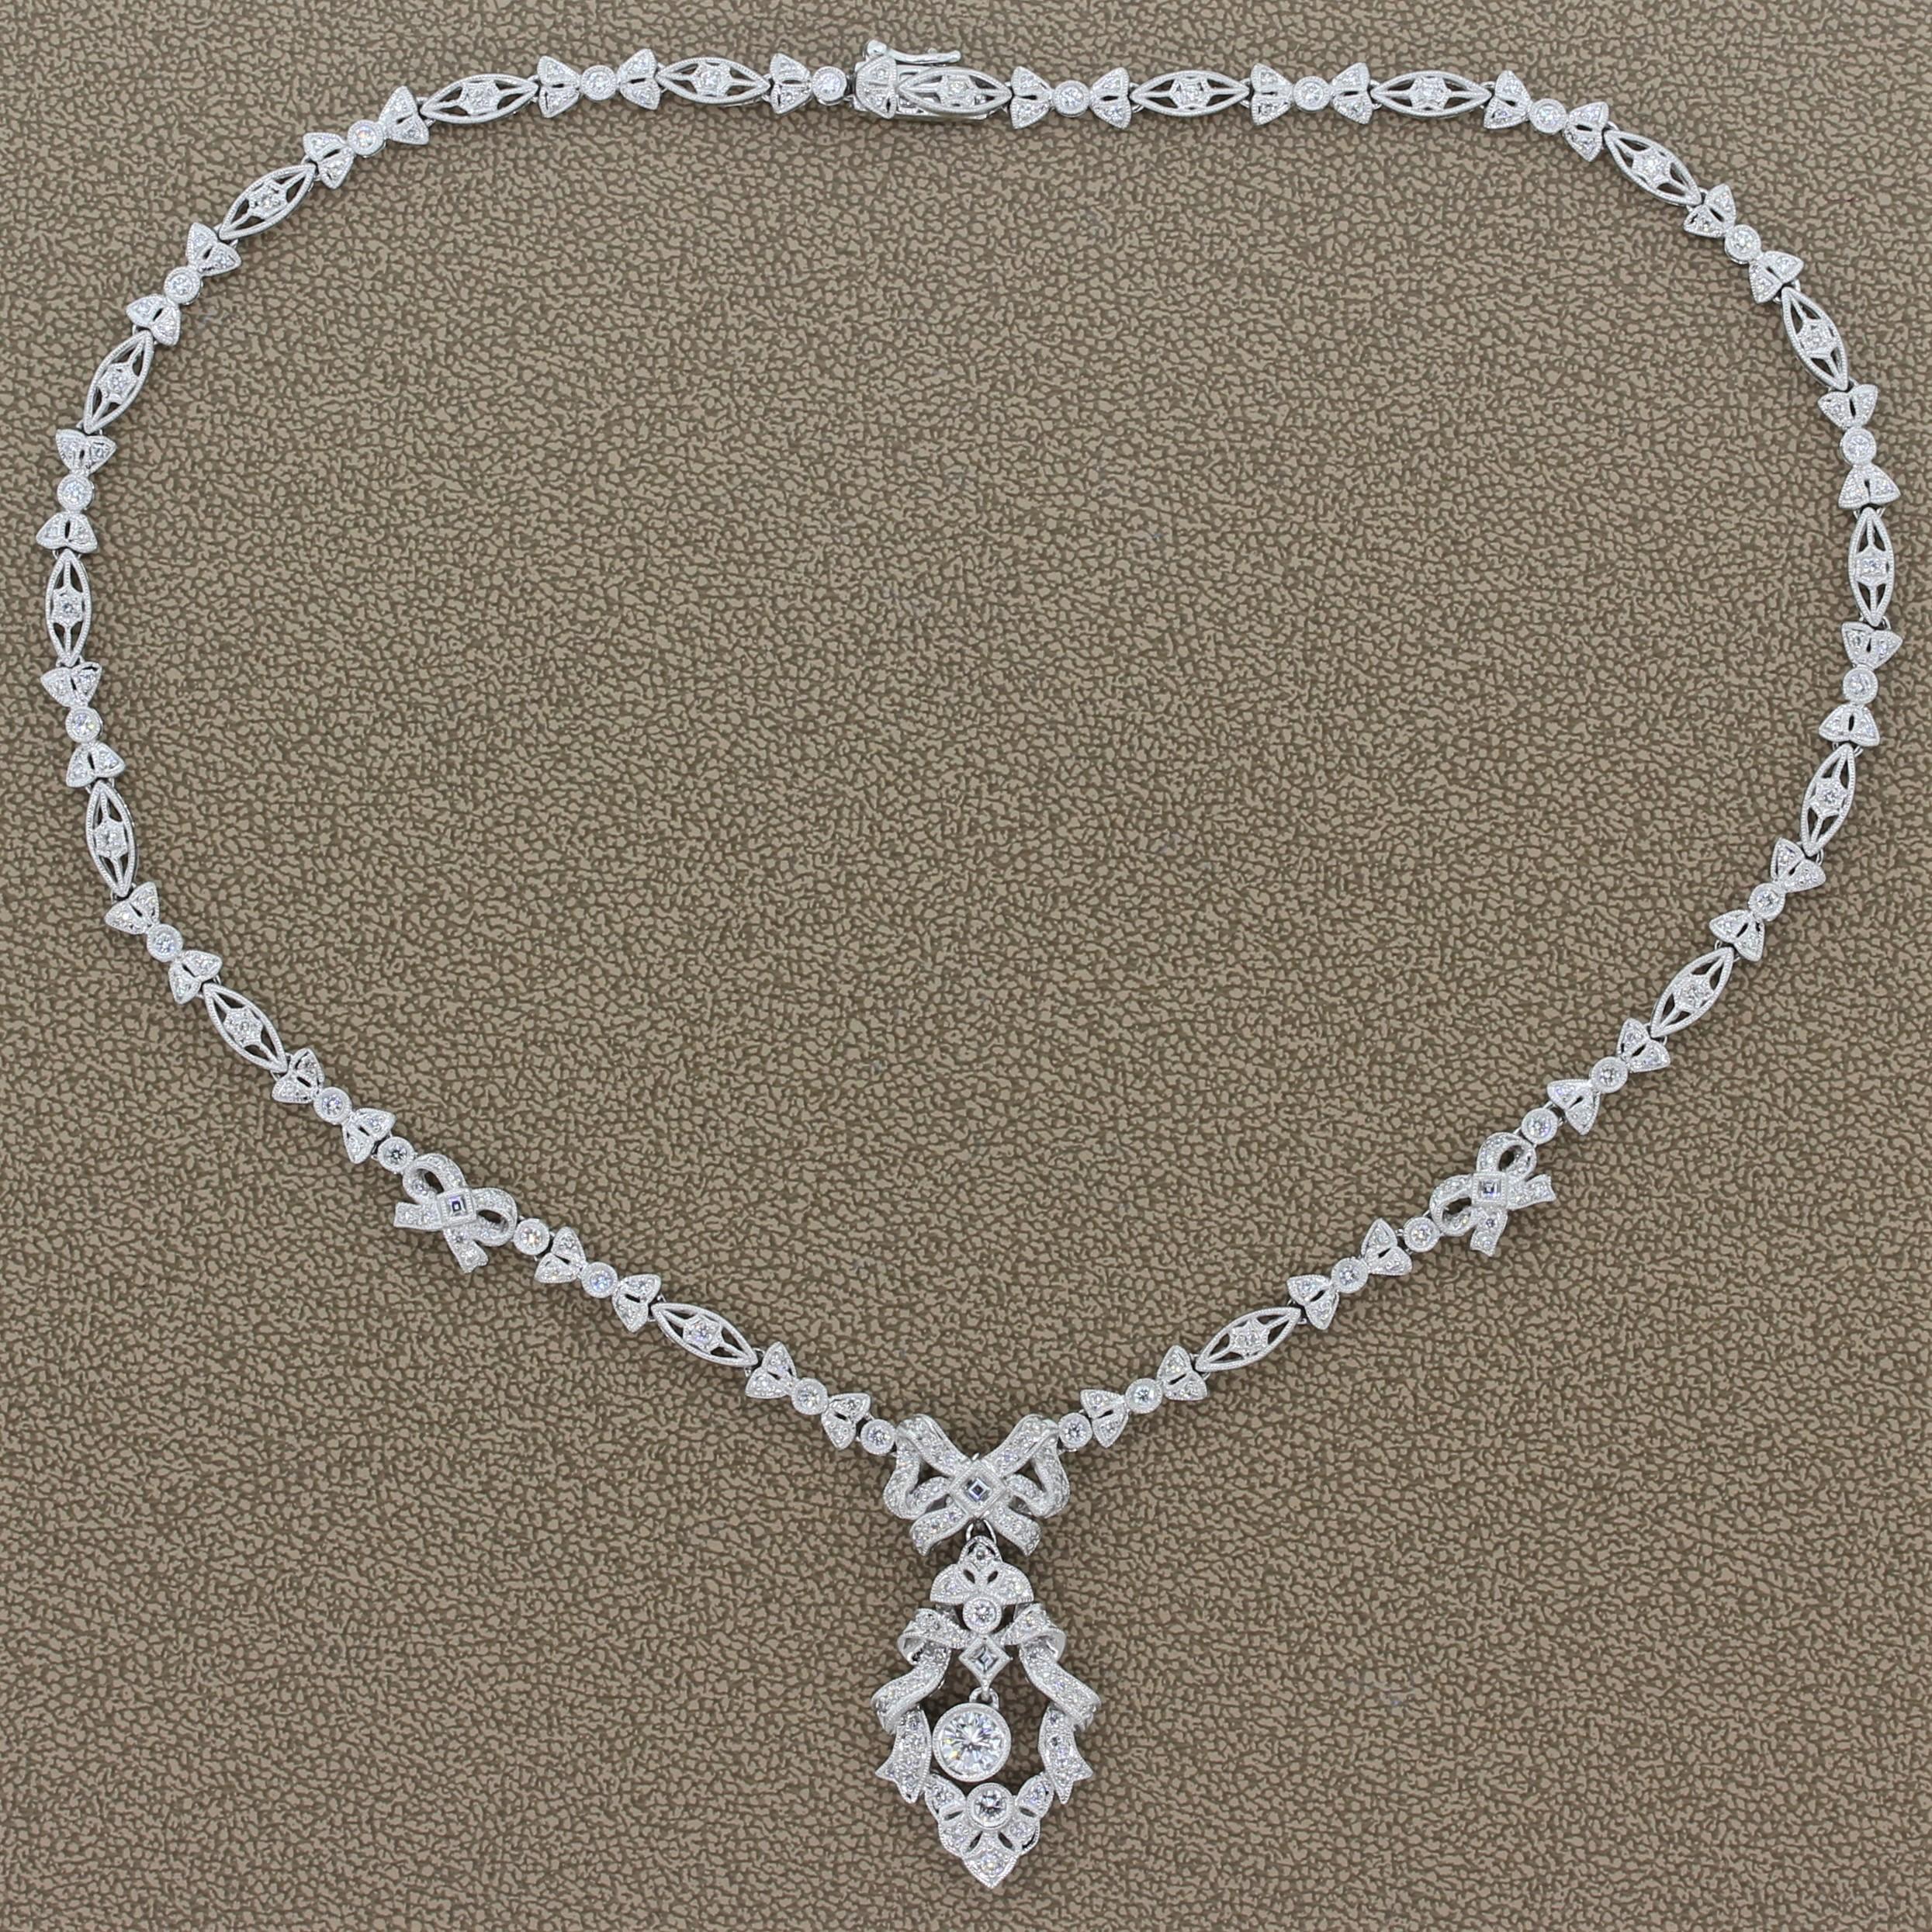 A feminine necklace made in Edwardian style featuring a 0.54 carat round cut diamond drop. The ribbons and bows of this platinum necklace are studded with 3.82 carats of round cut diamonds with a milgrain border. The detachable drop has a hook so